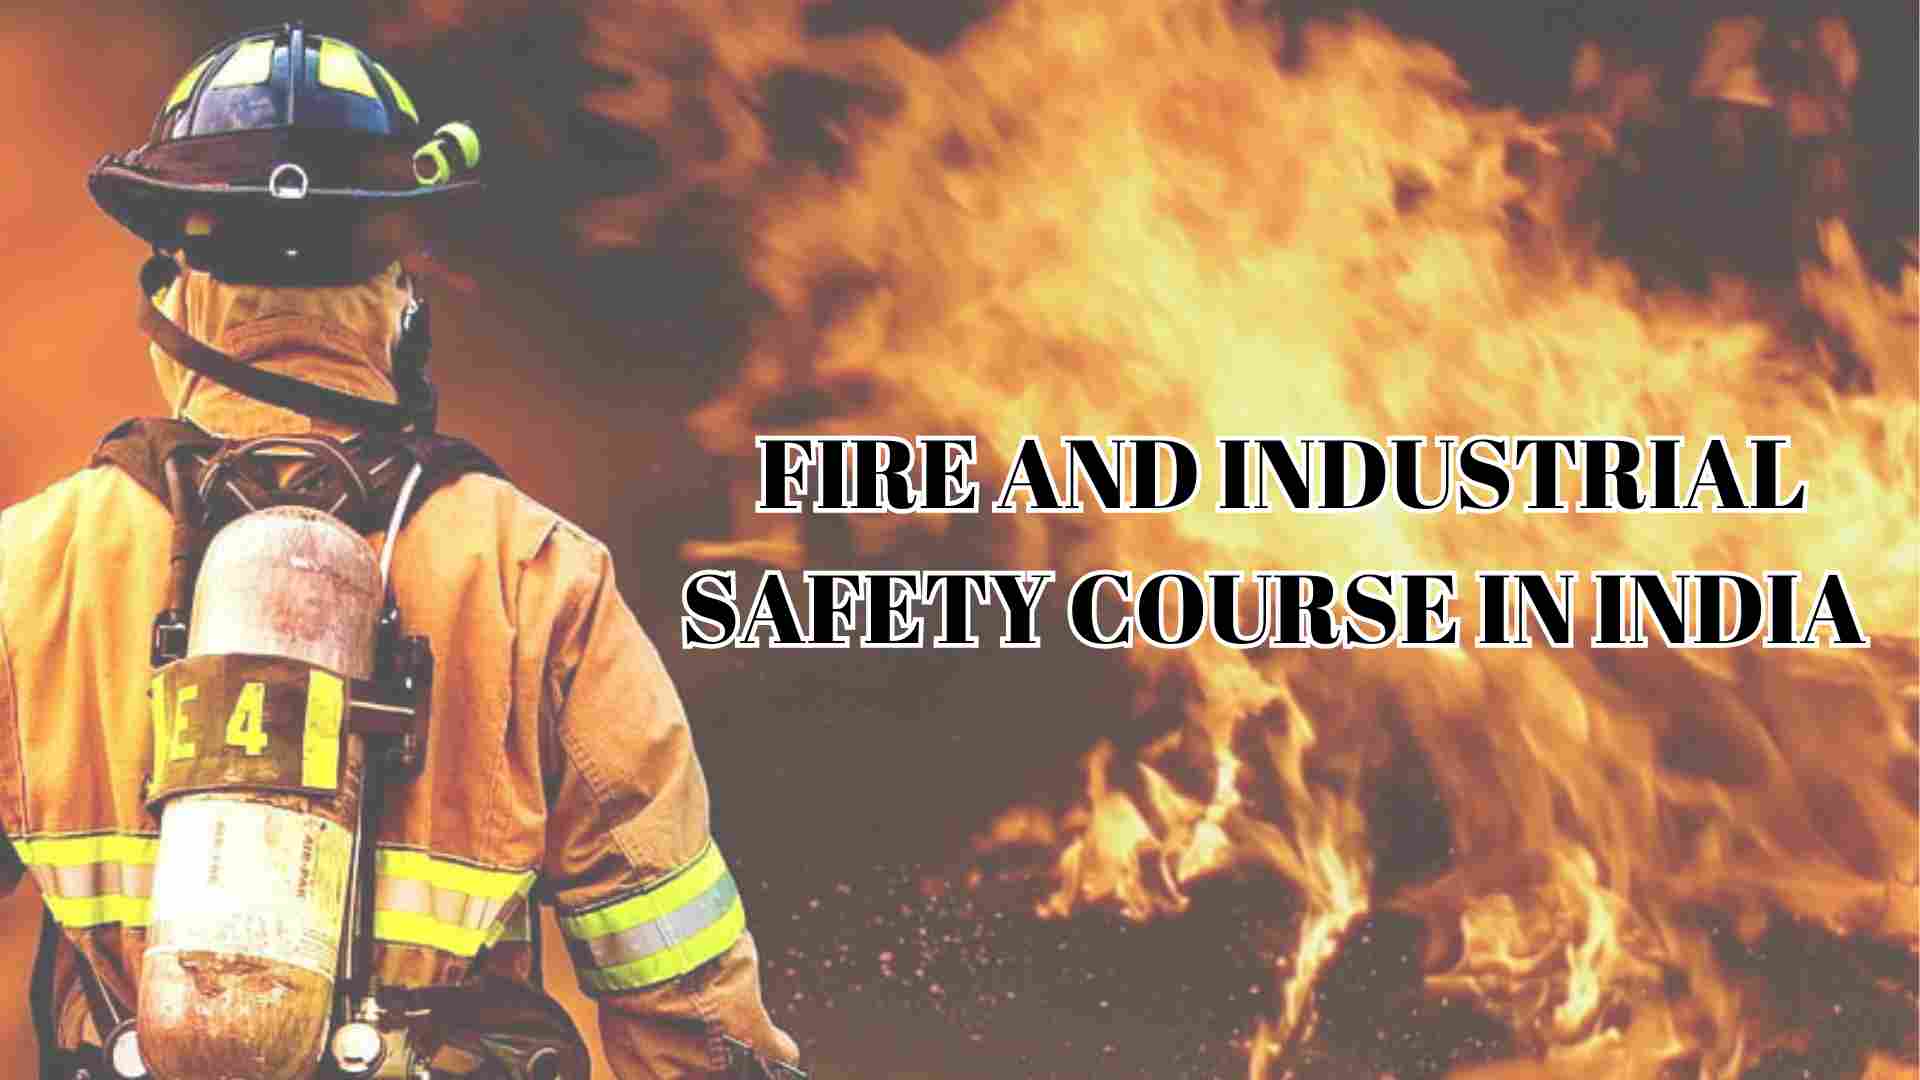 Fire and industrial safety